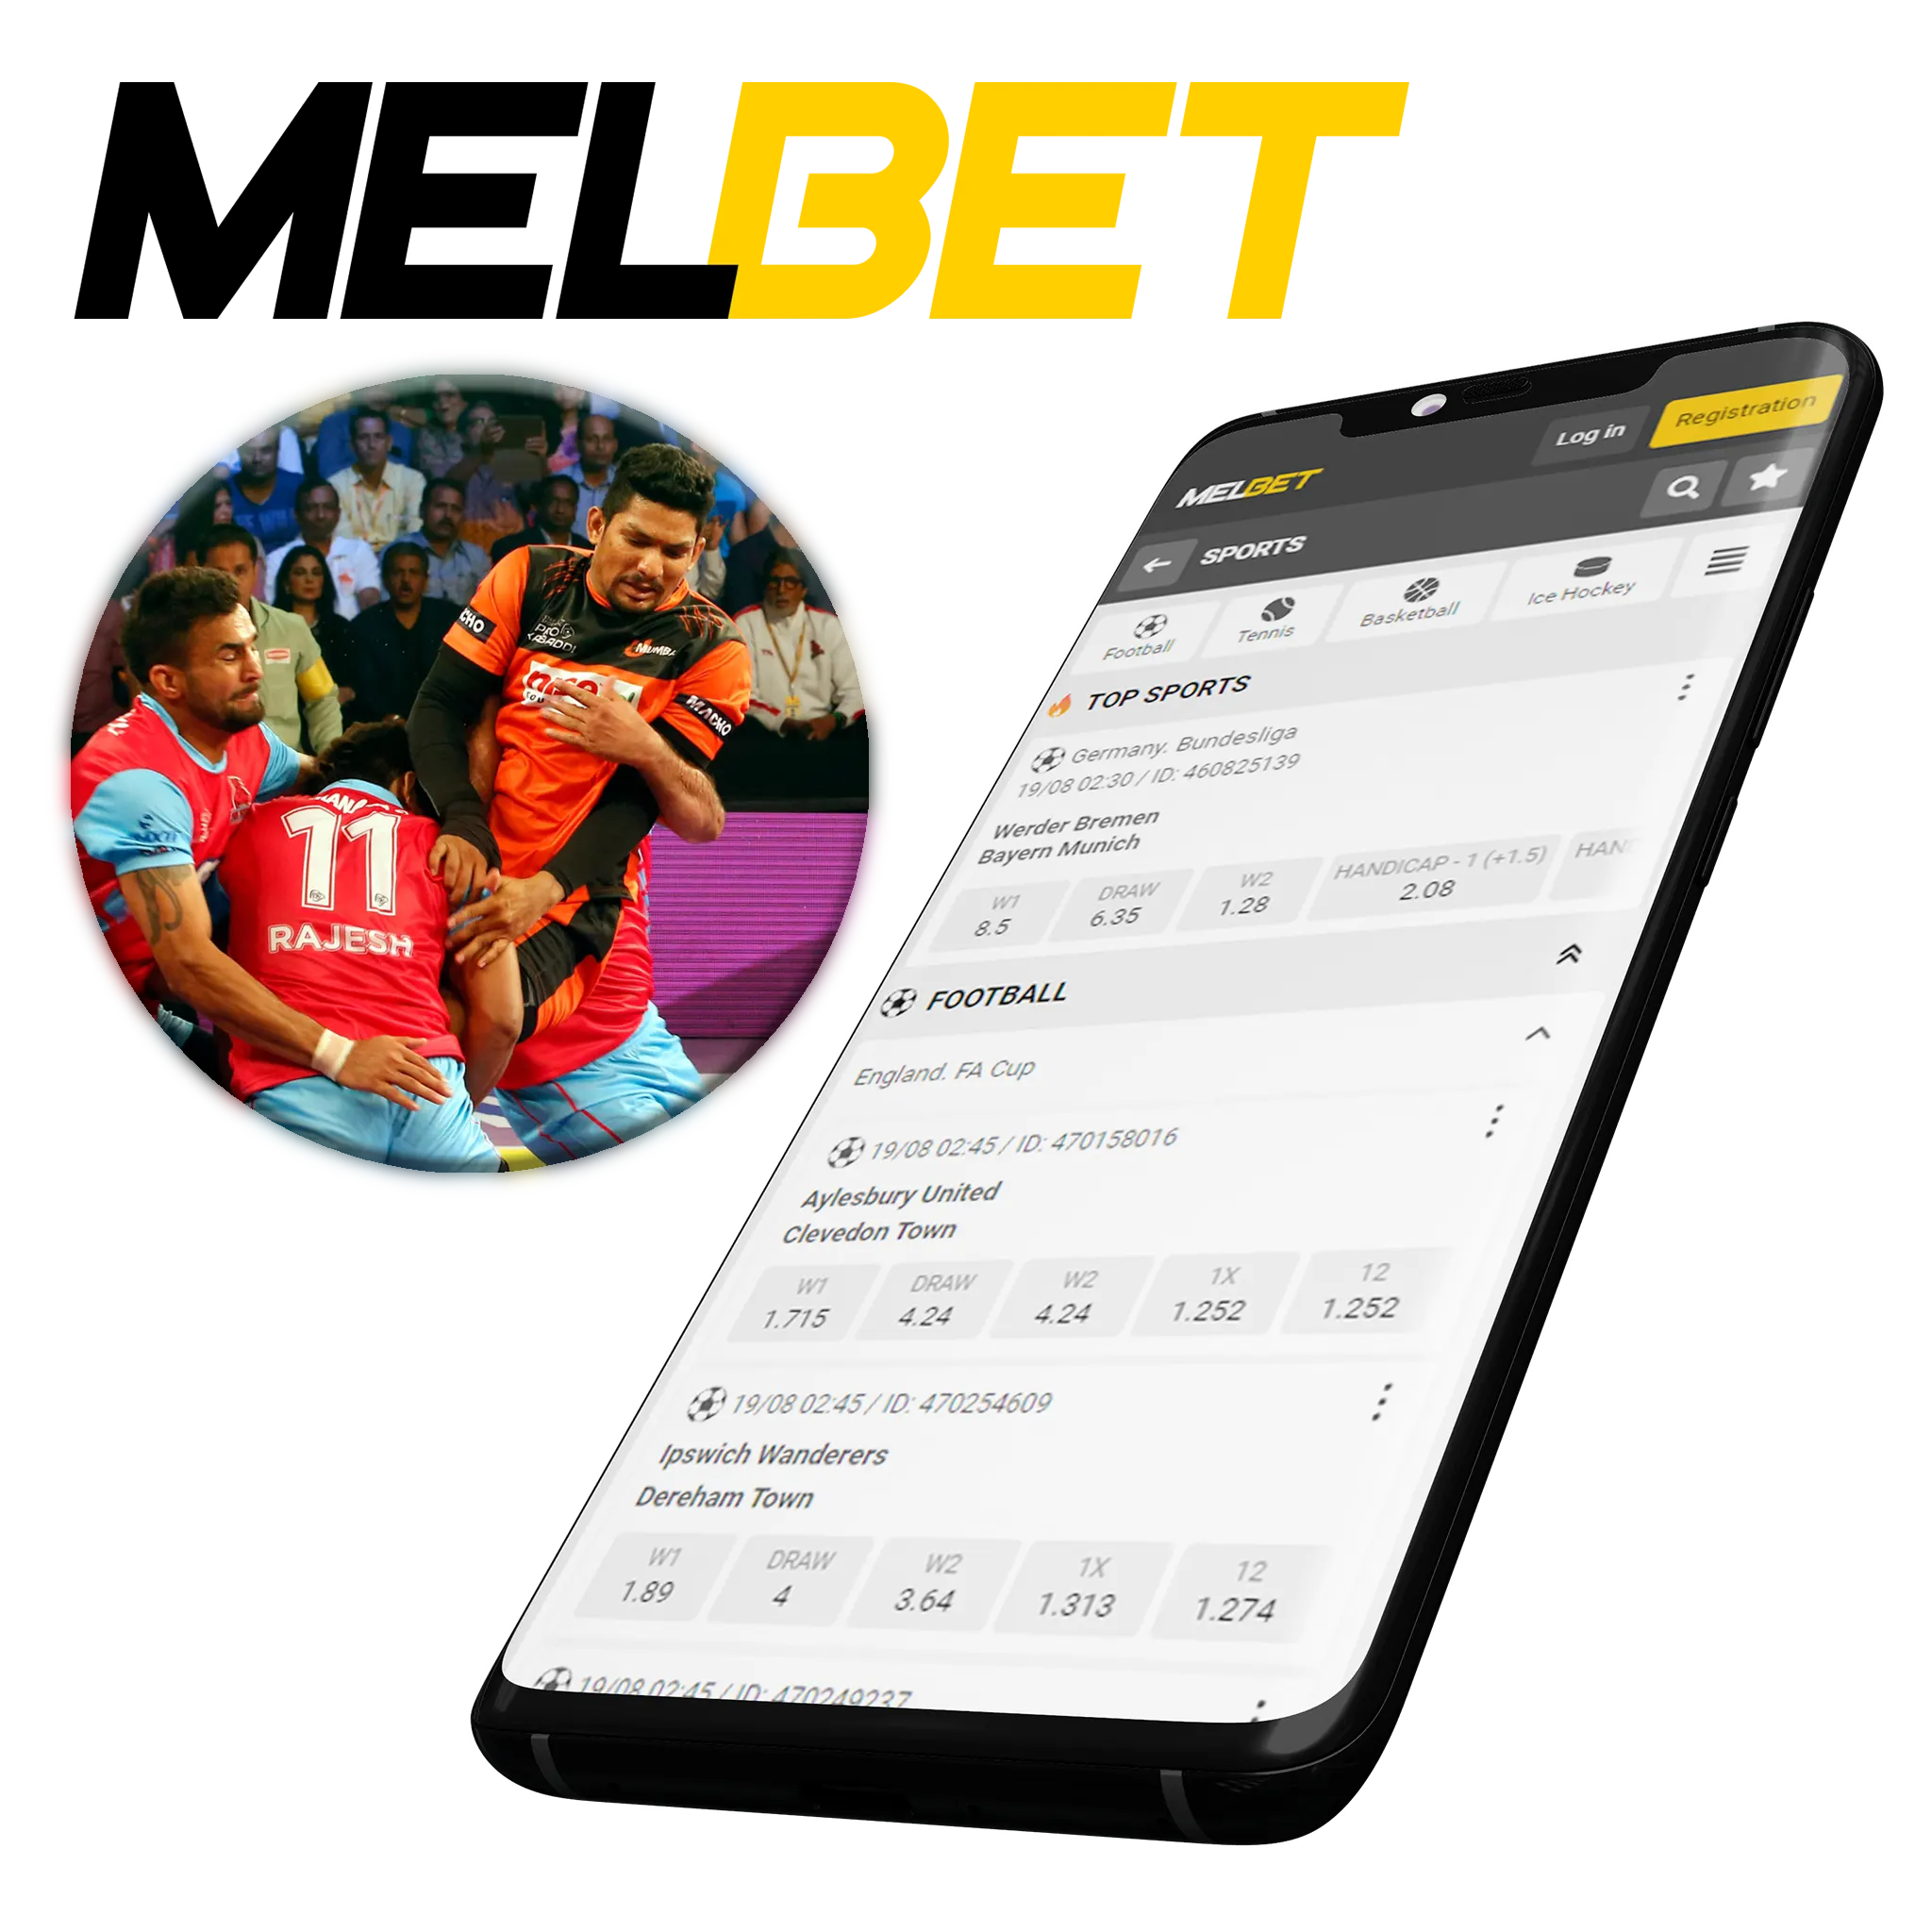 Melbet mobile application supports betting on various sports, including kabaddi.